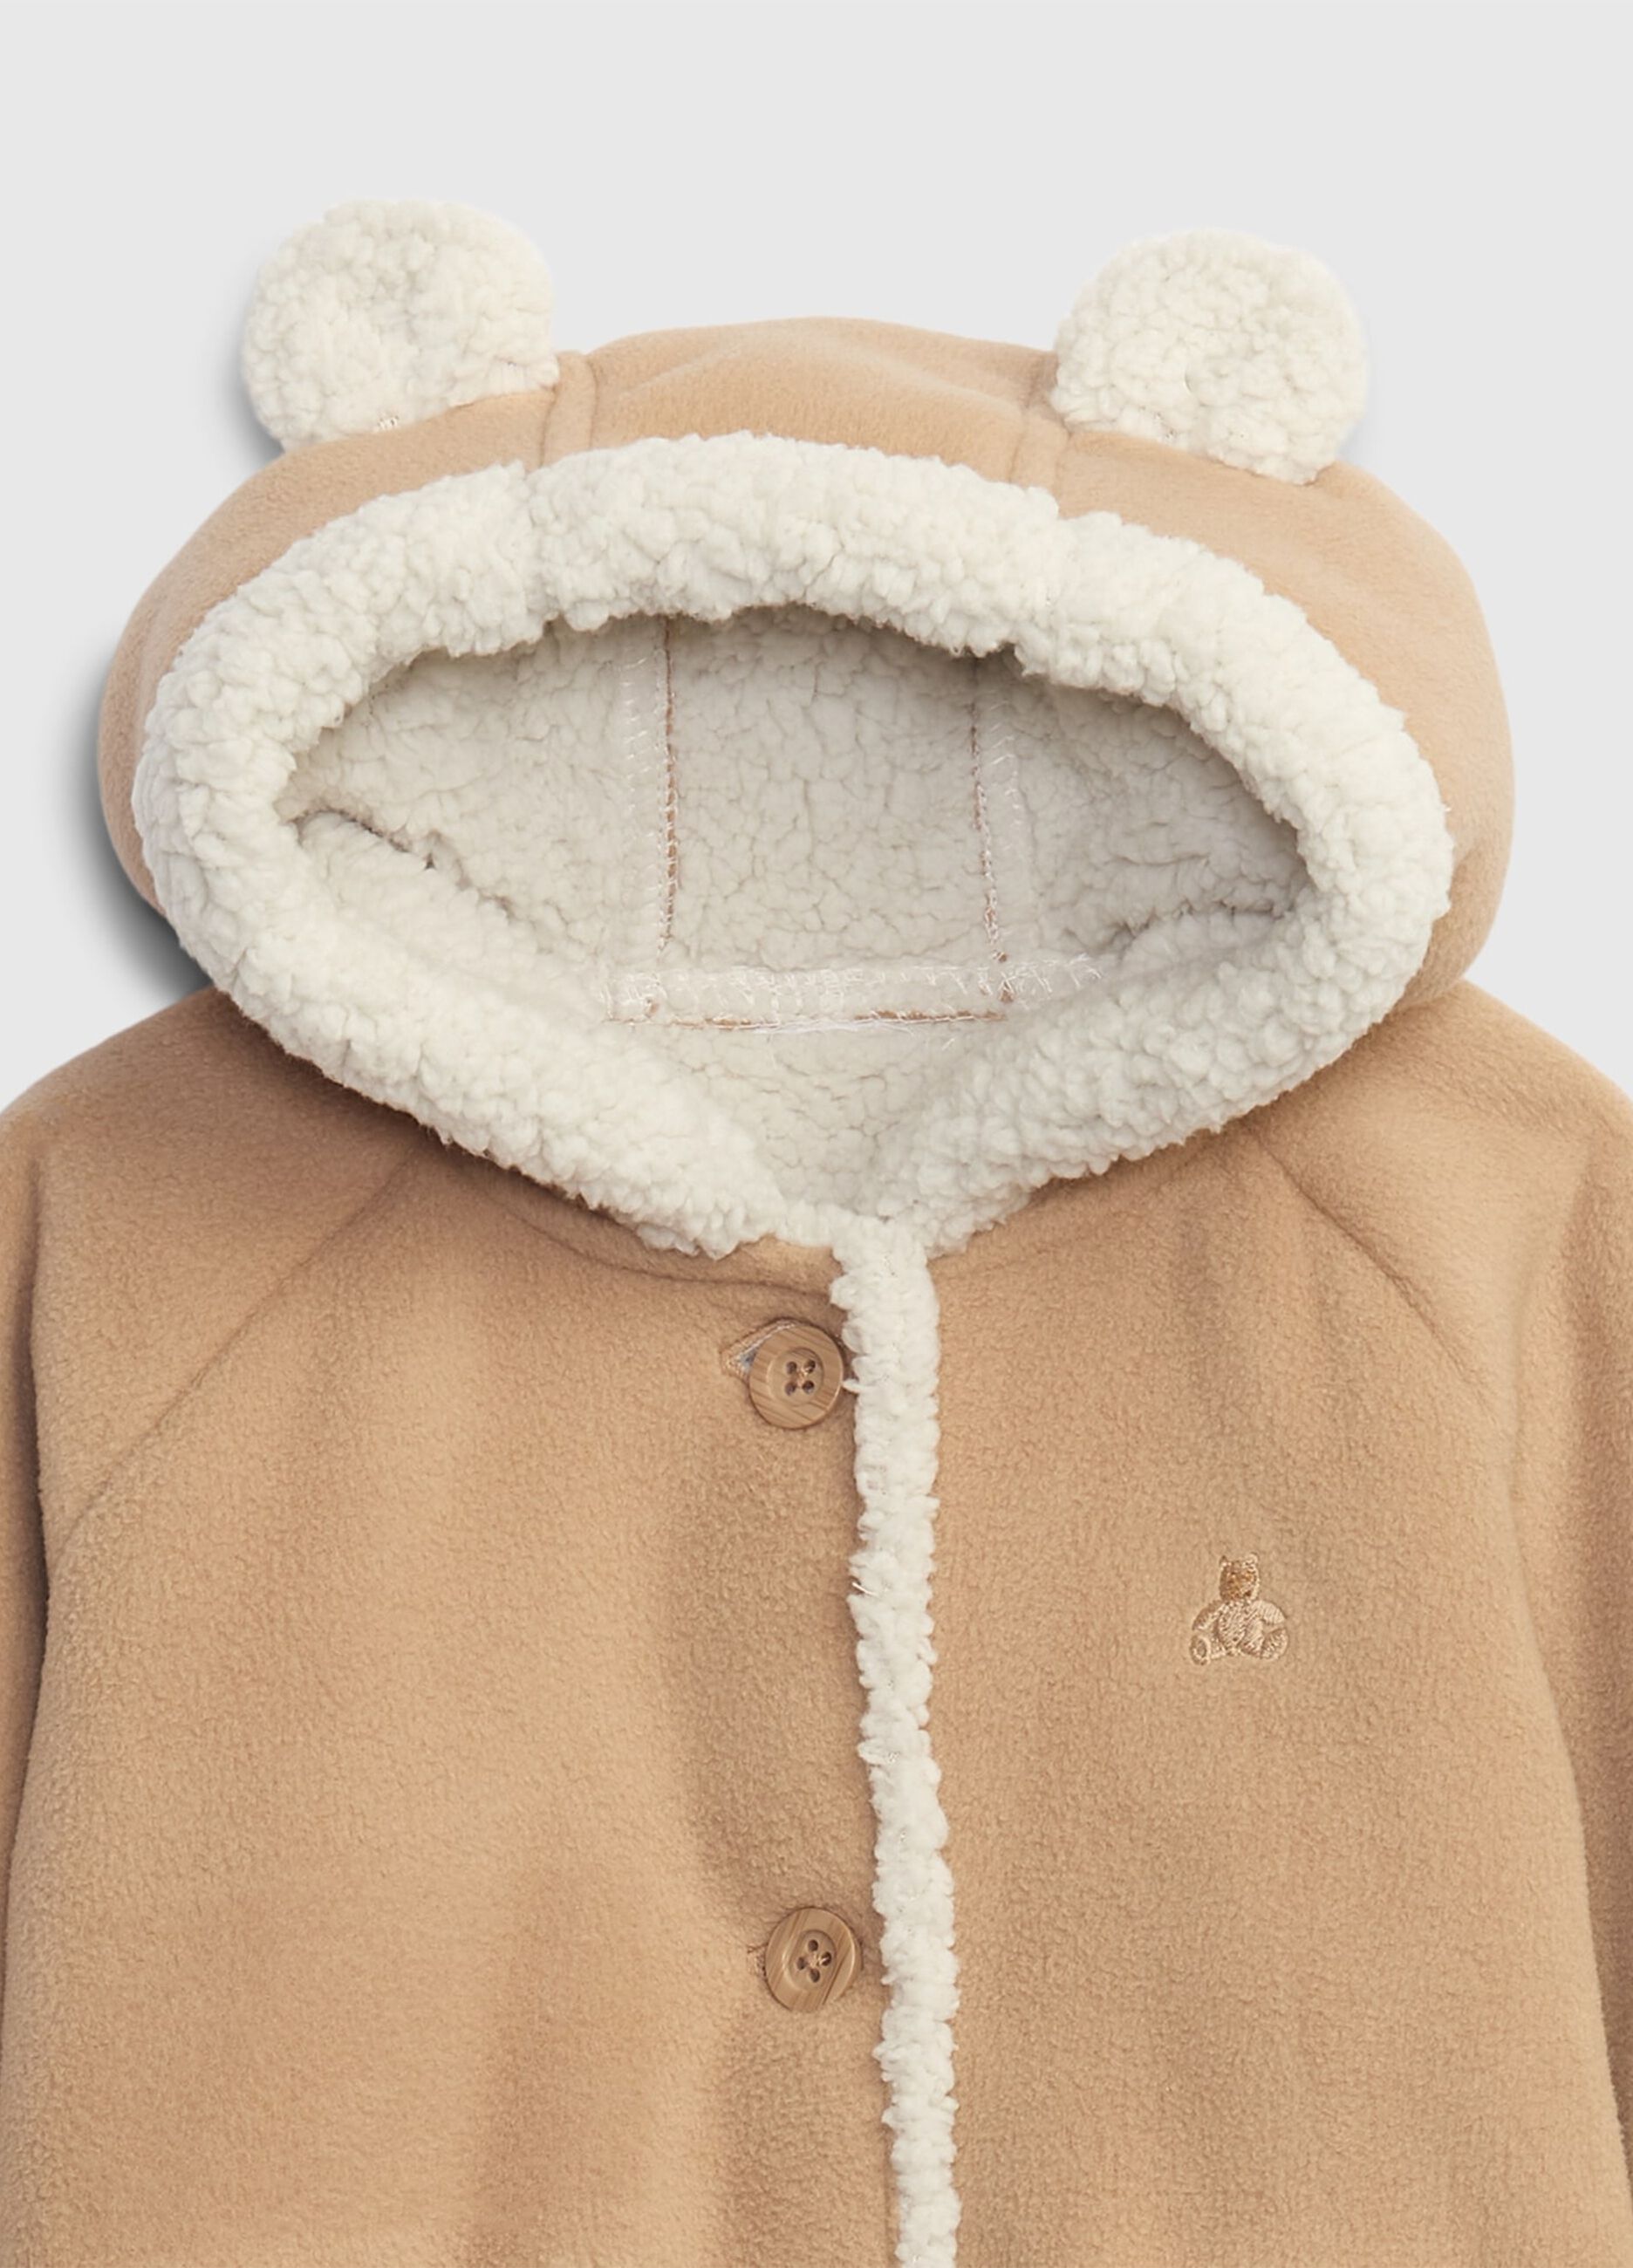 Onesie with sherpa lining